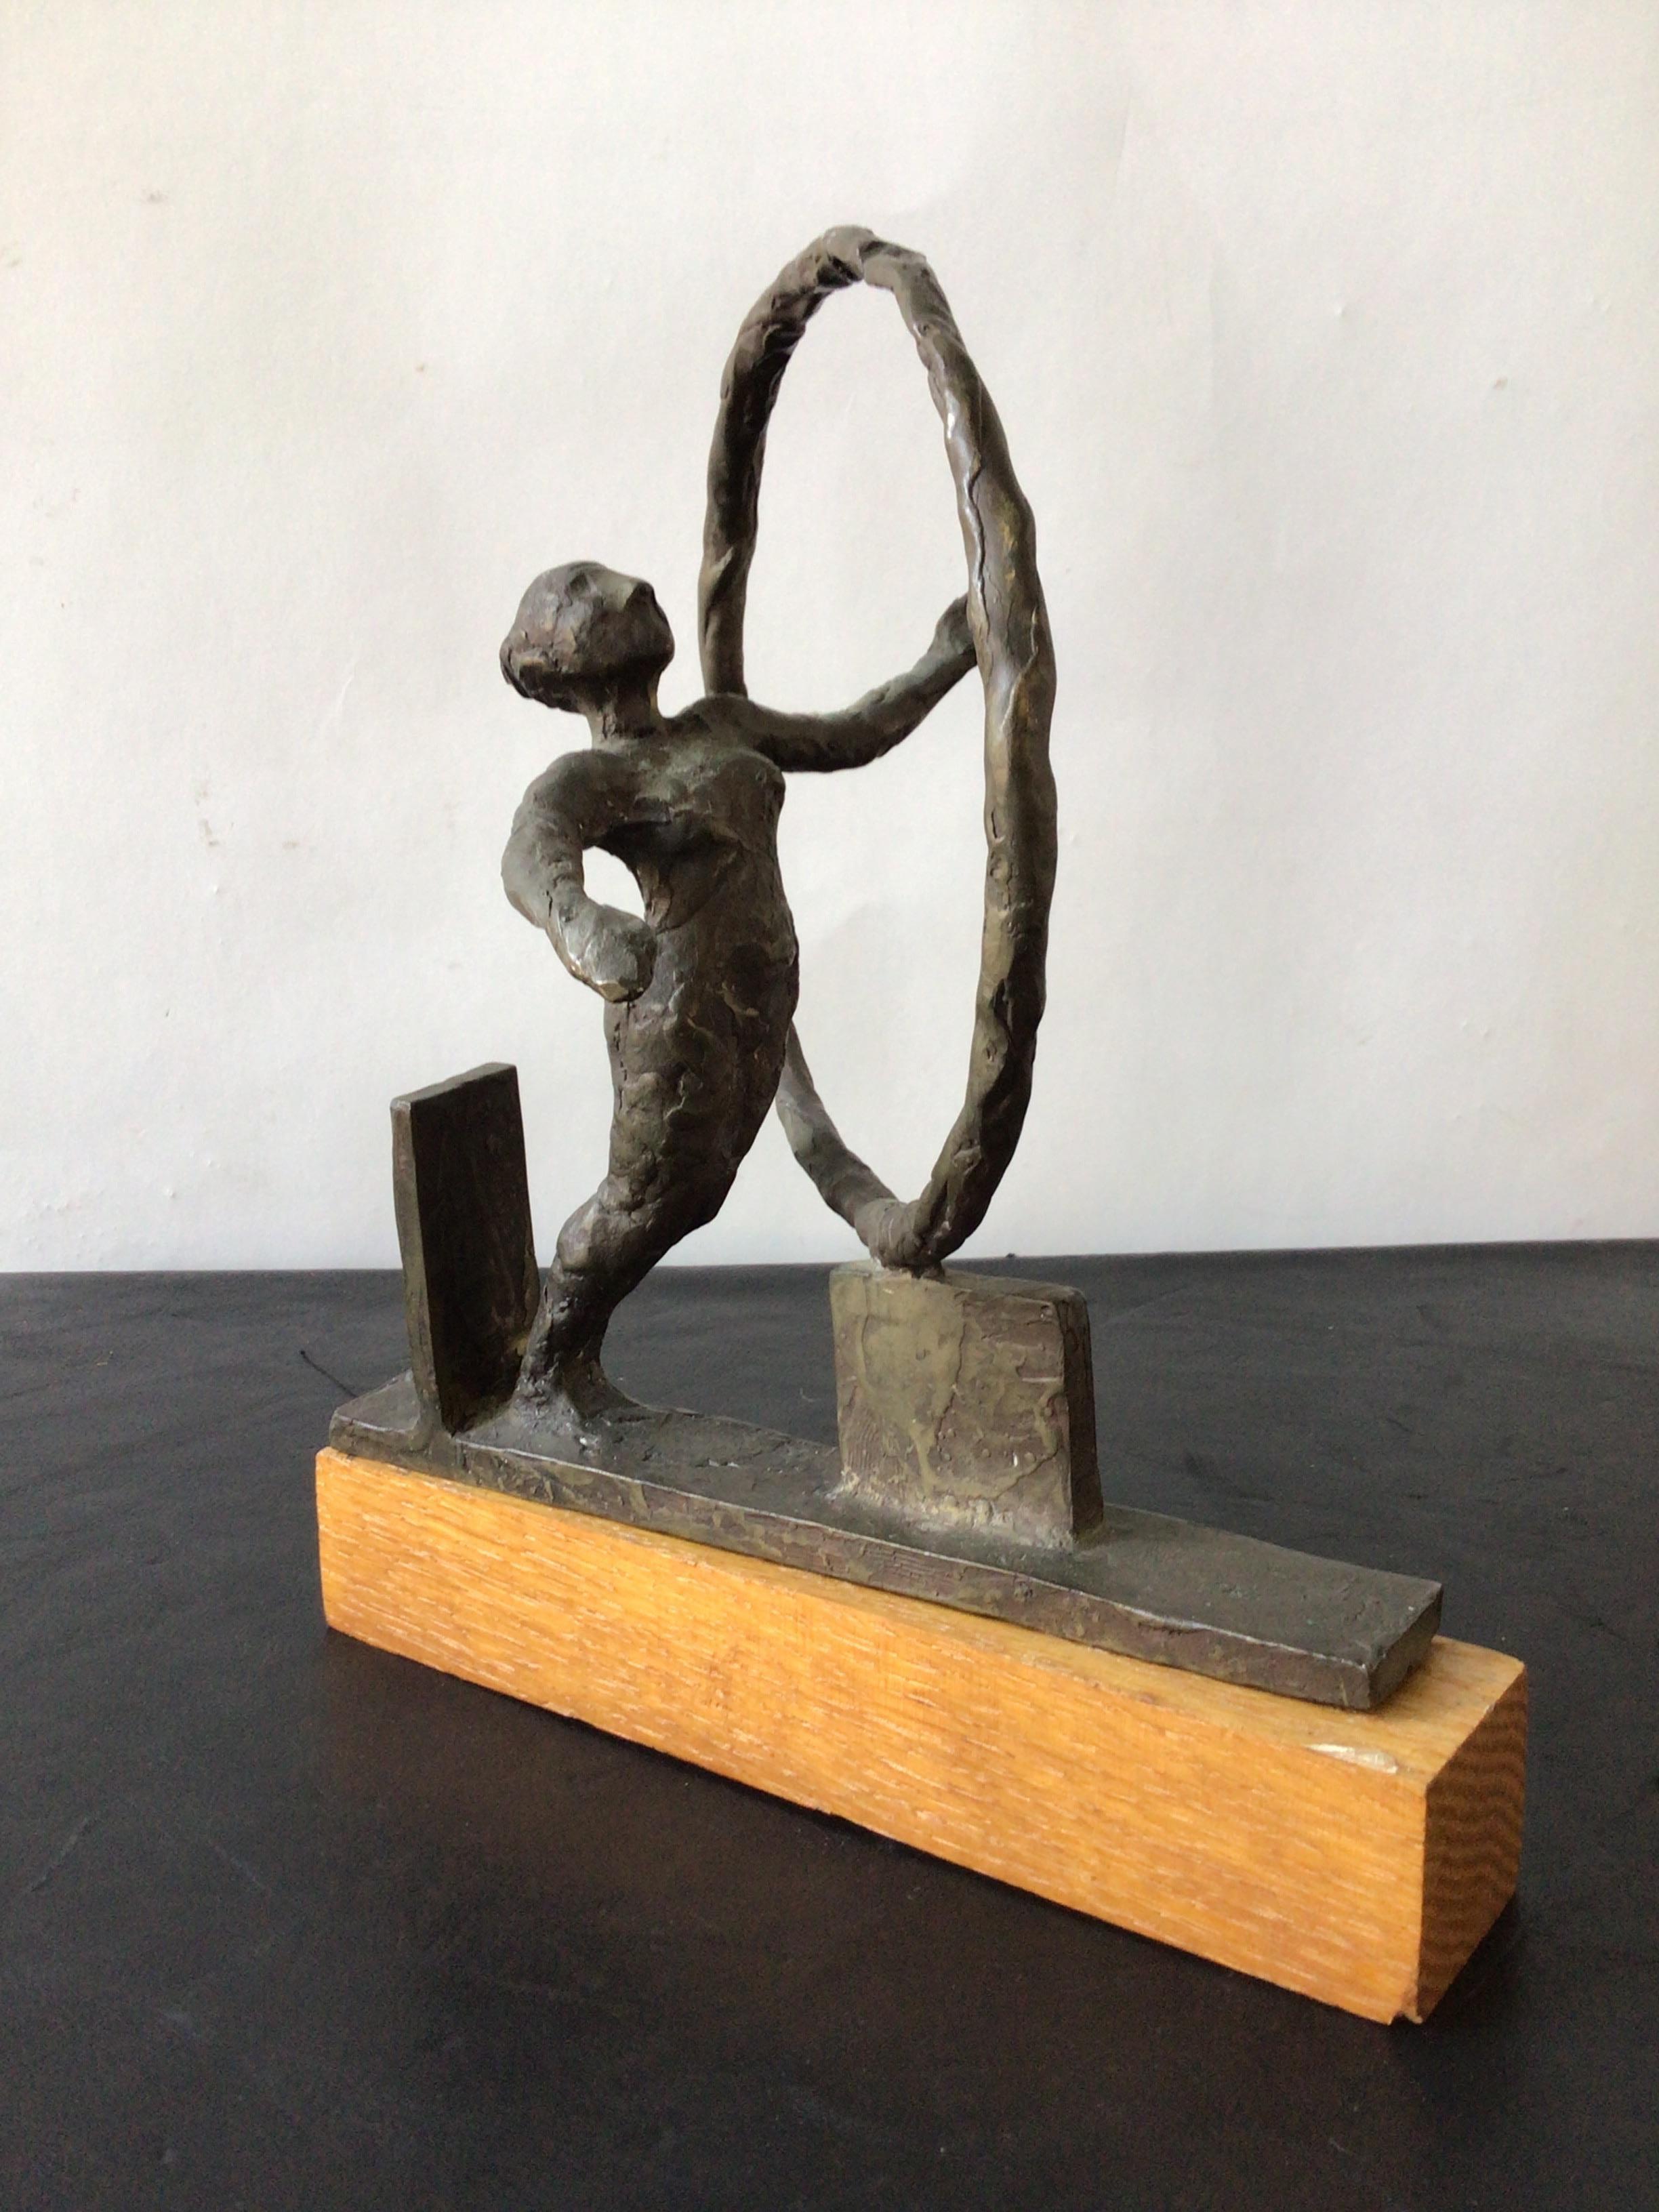 1960s bronze sculpture of nude woman on wood base.